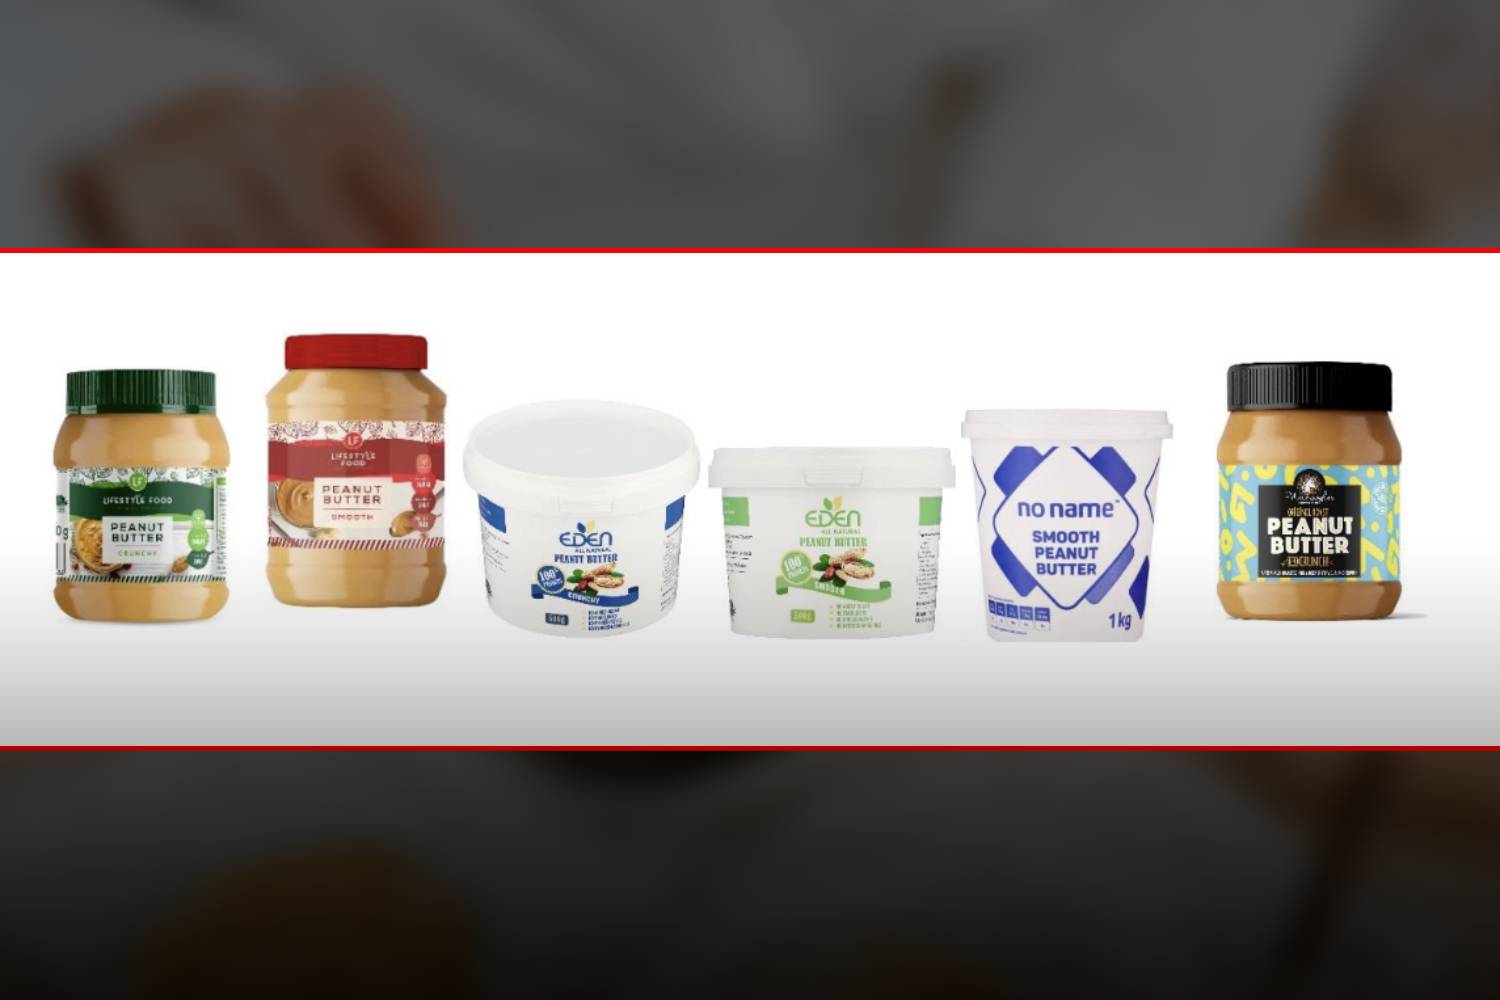 Peanut butter recall House of Natural Butters ordered to remove